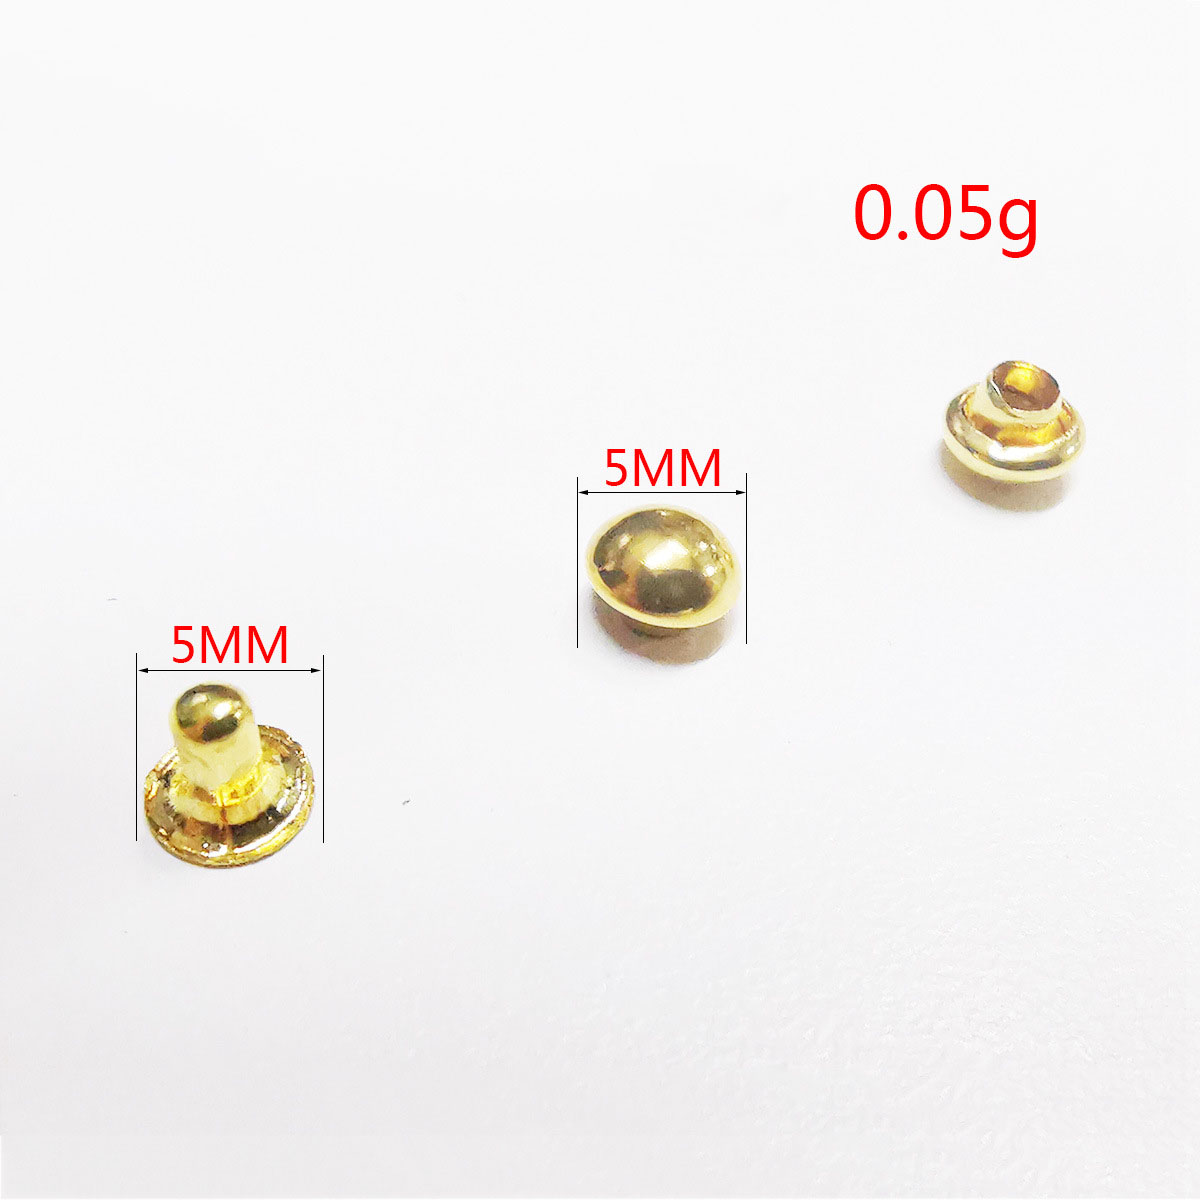 5mm gold